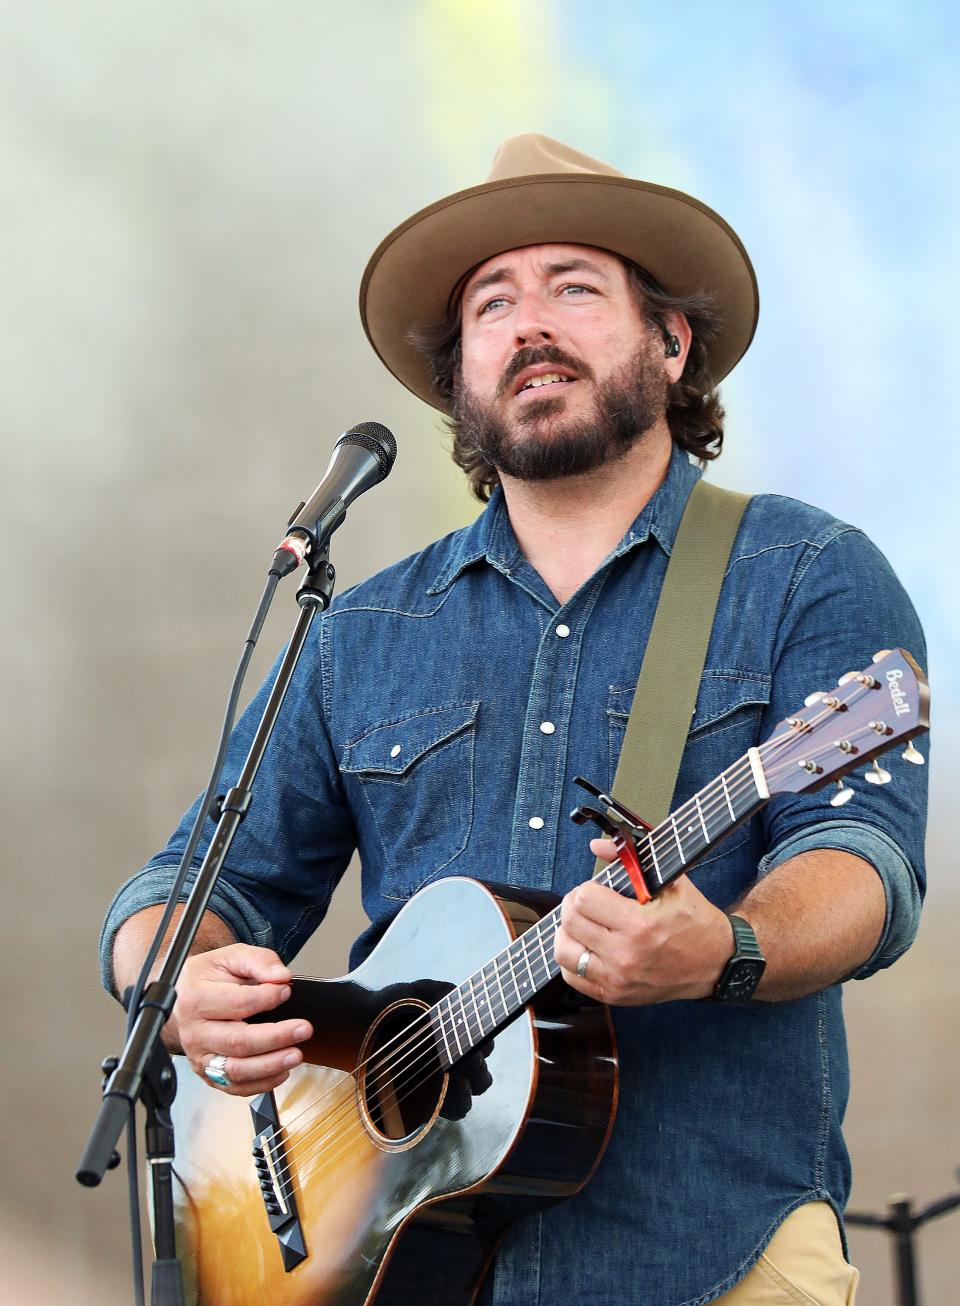 Jason Walsmith of The Nadas plays alt-rock-country music at the Iowa State Fair in 2022.